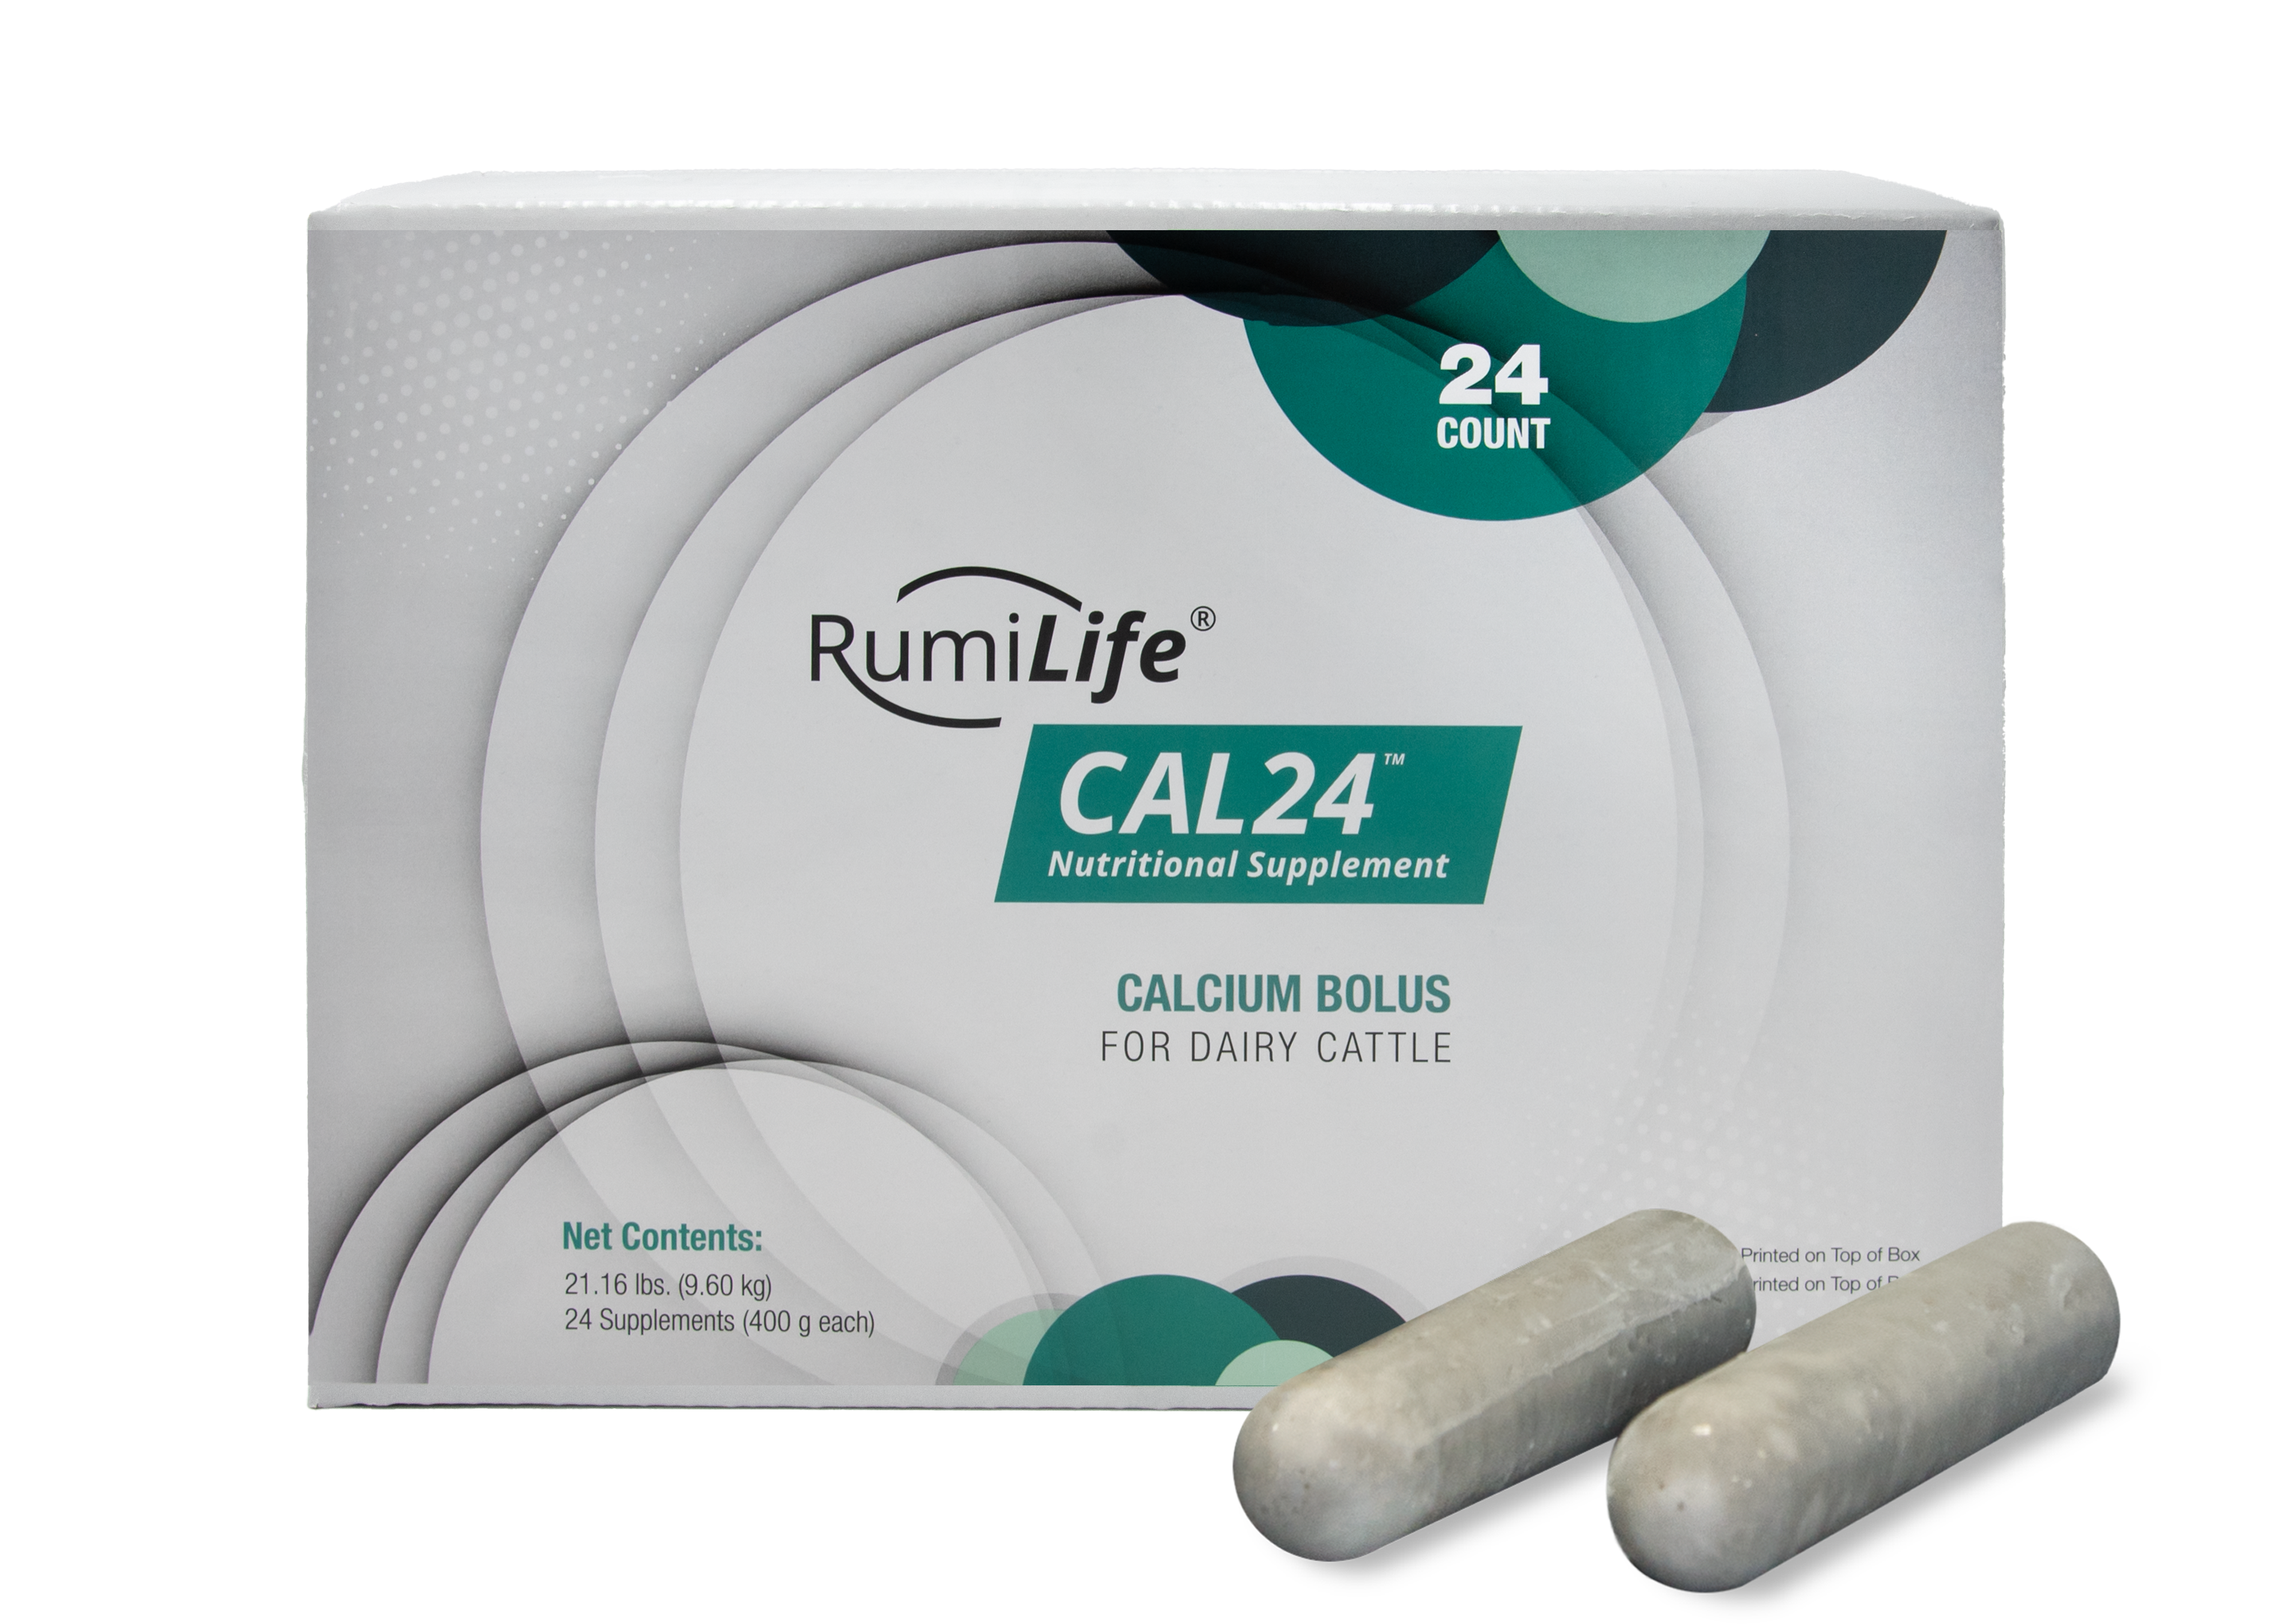 RumiLife CAL24 packaging with boluses